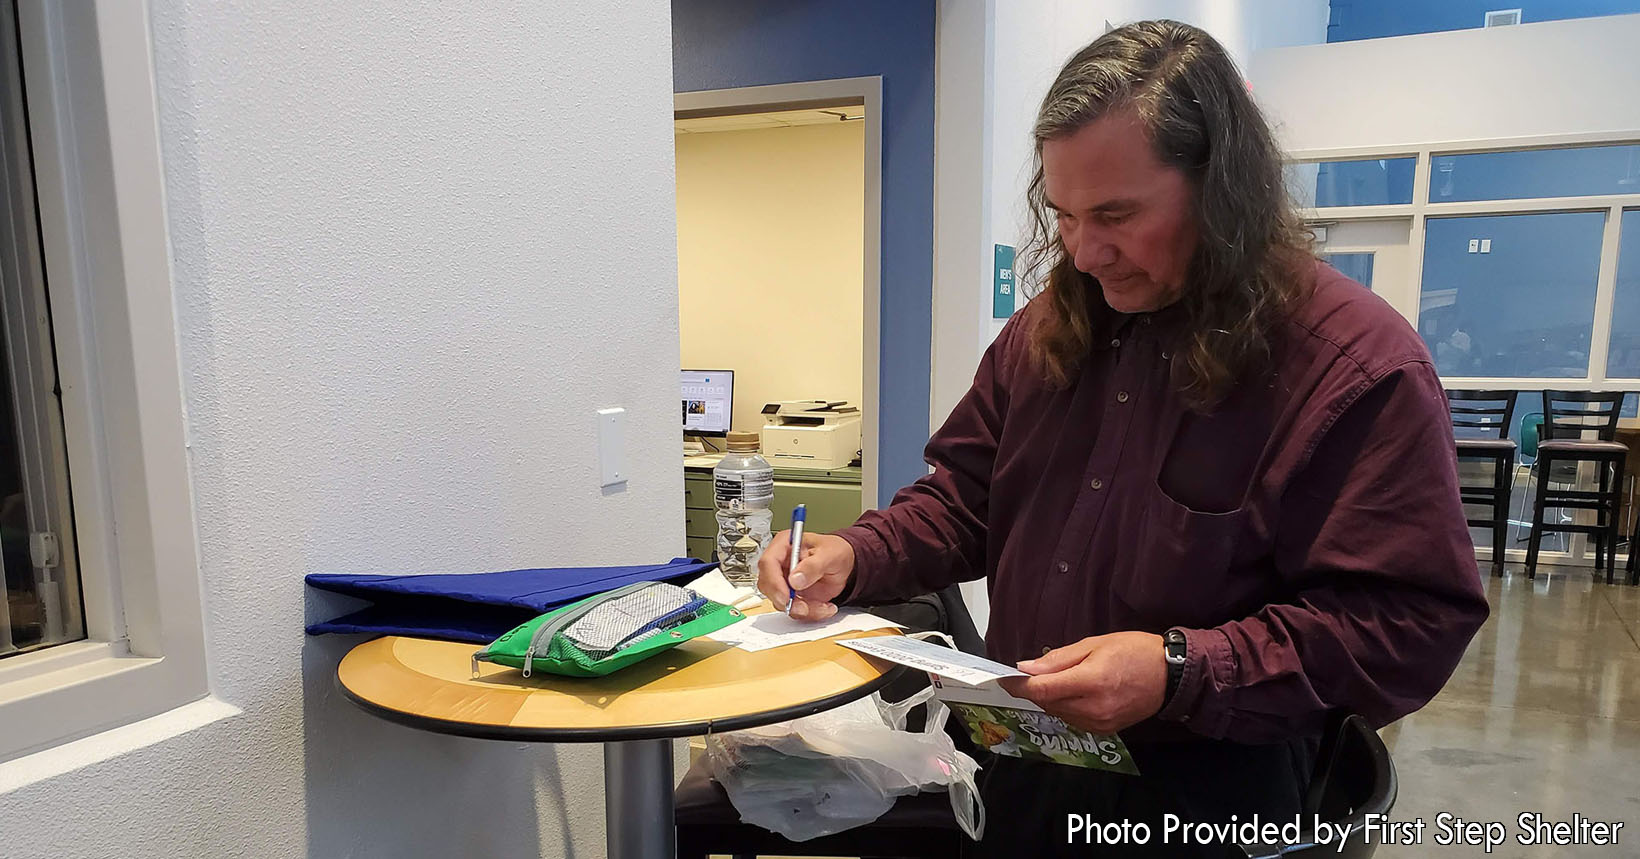 The residents of the First Step Shelter are all looking for opportunities to better themselves. Their main goal is to acquire a stable job and to become self-sufficient. This resident has just come back from a job fair and is writing down some notes that will be beneficial to him in the future.